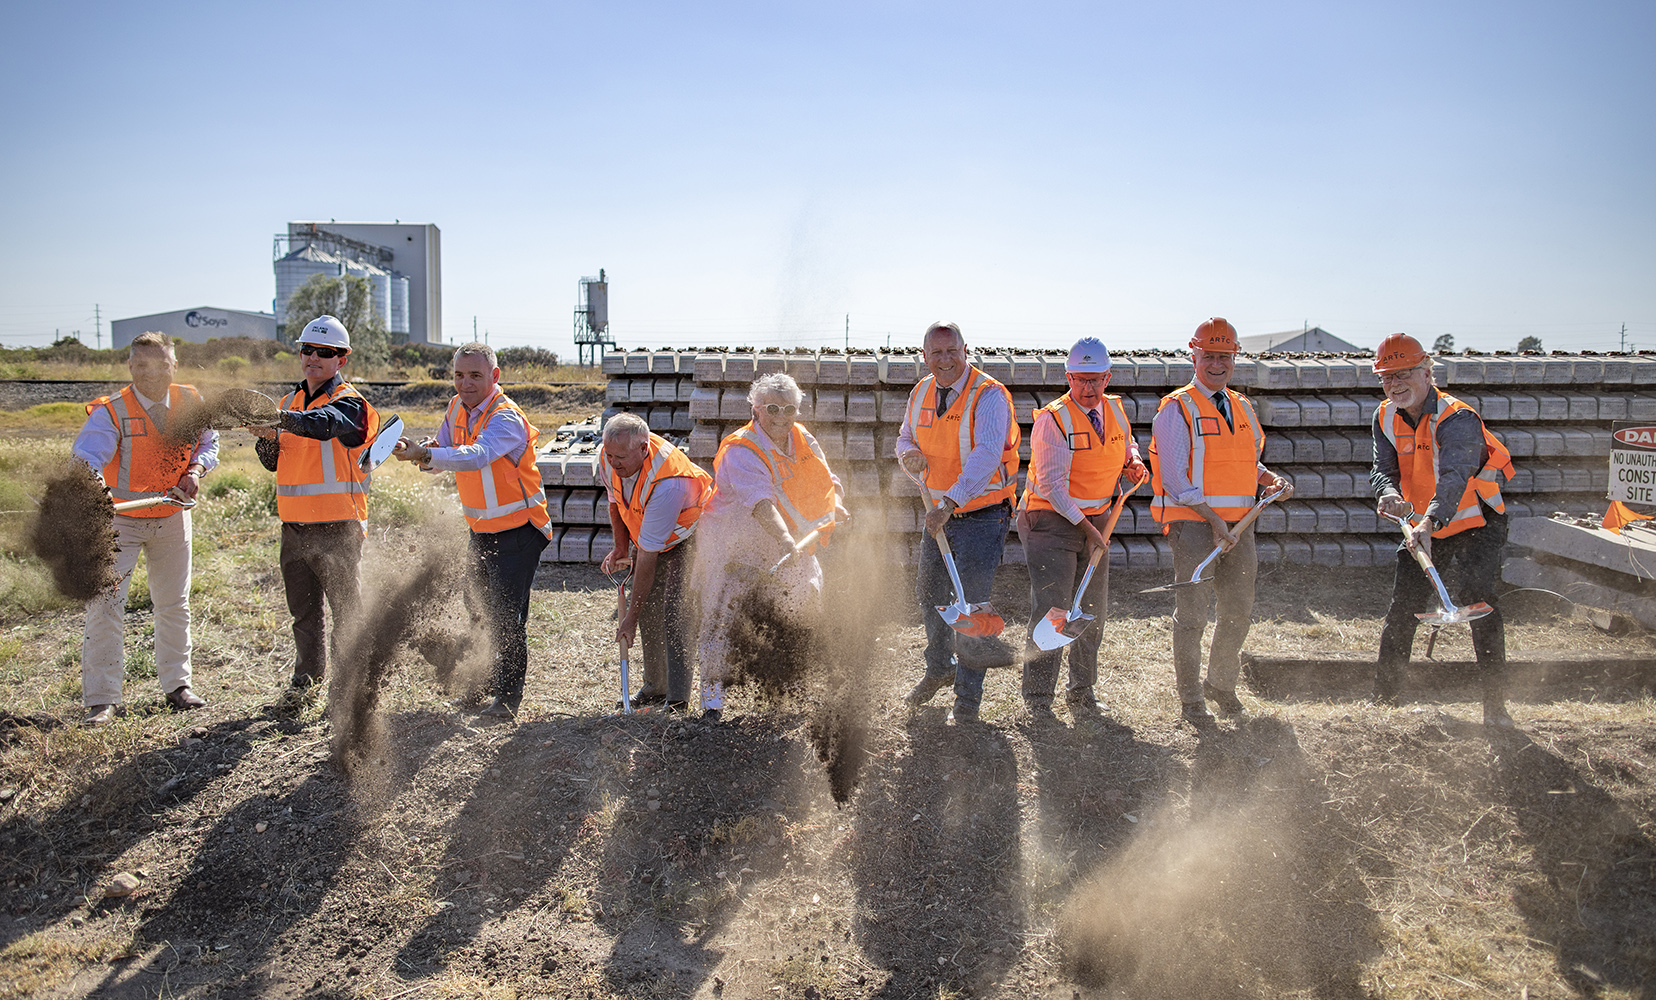 Special guests including Deputy Prime Minister Michael McCormarck, Member for Parkes Mark Coulton and Inland Rail CEO Richard Wankmuller ceremonially turning sod.